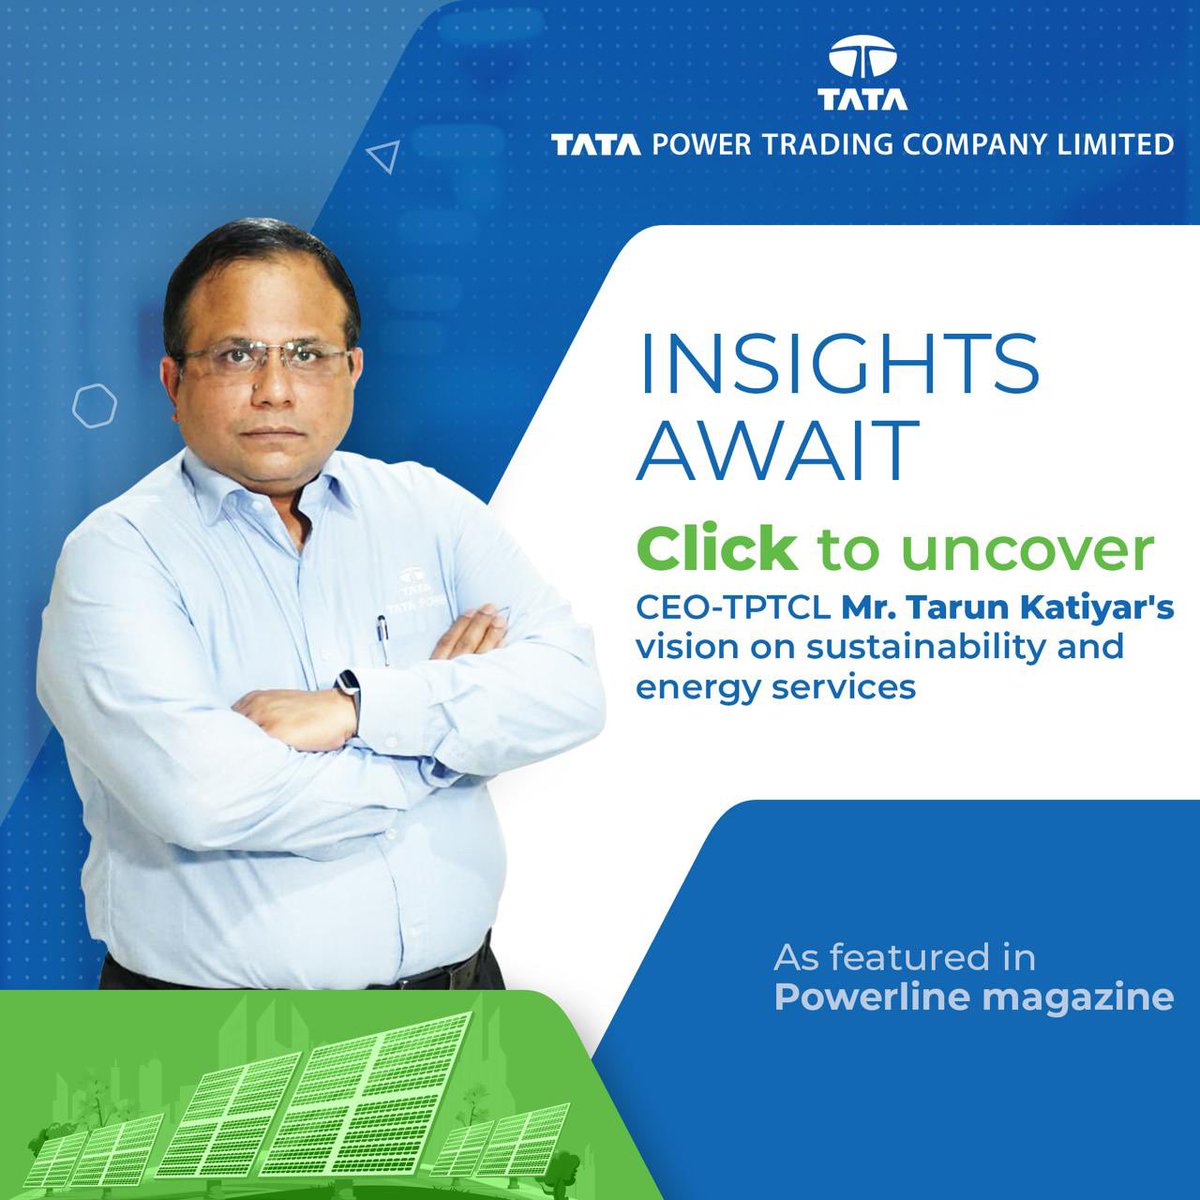 In an exclusive interview with Powerline Magazine, Mr. Tarun Kathiyar, CEO - TPTCL shares his insights on the future of sustainability & energy services. As Tata Power leads the charge in India’s sustainable energy transition! Businesses are prioritizing sustainability and